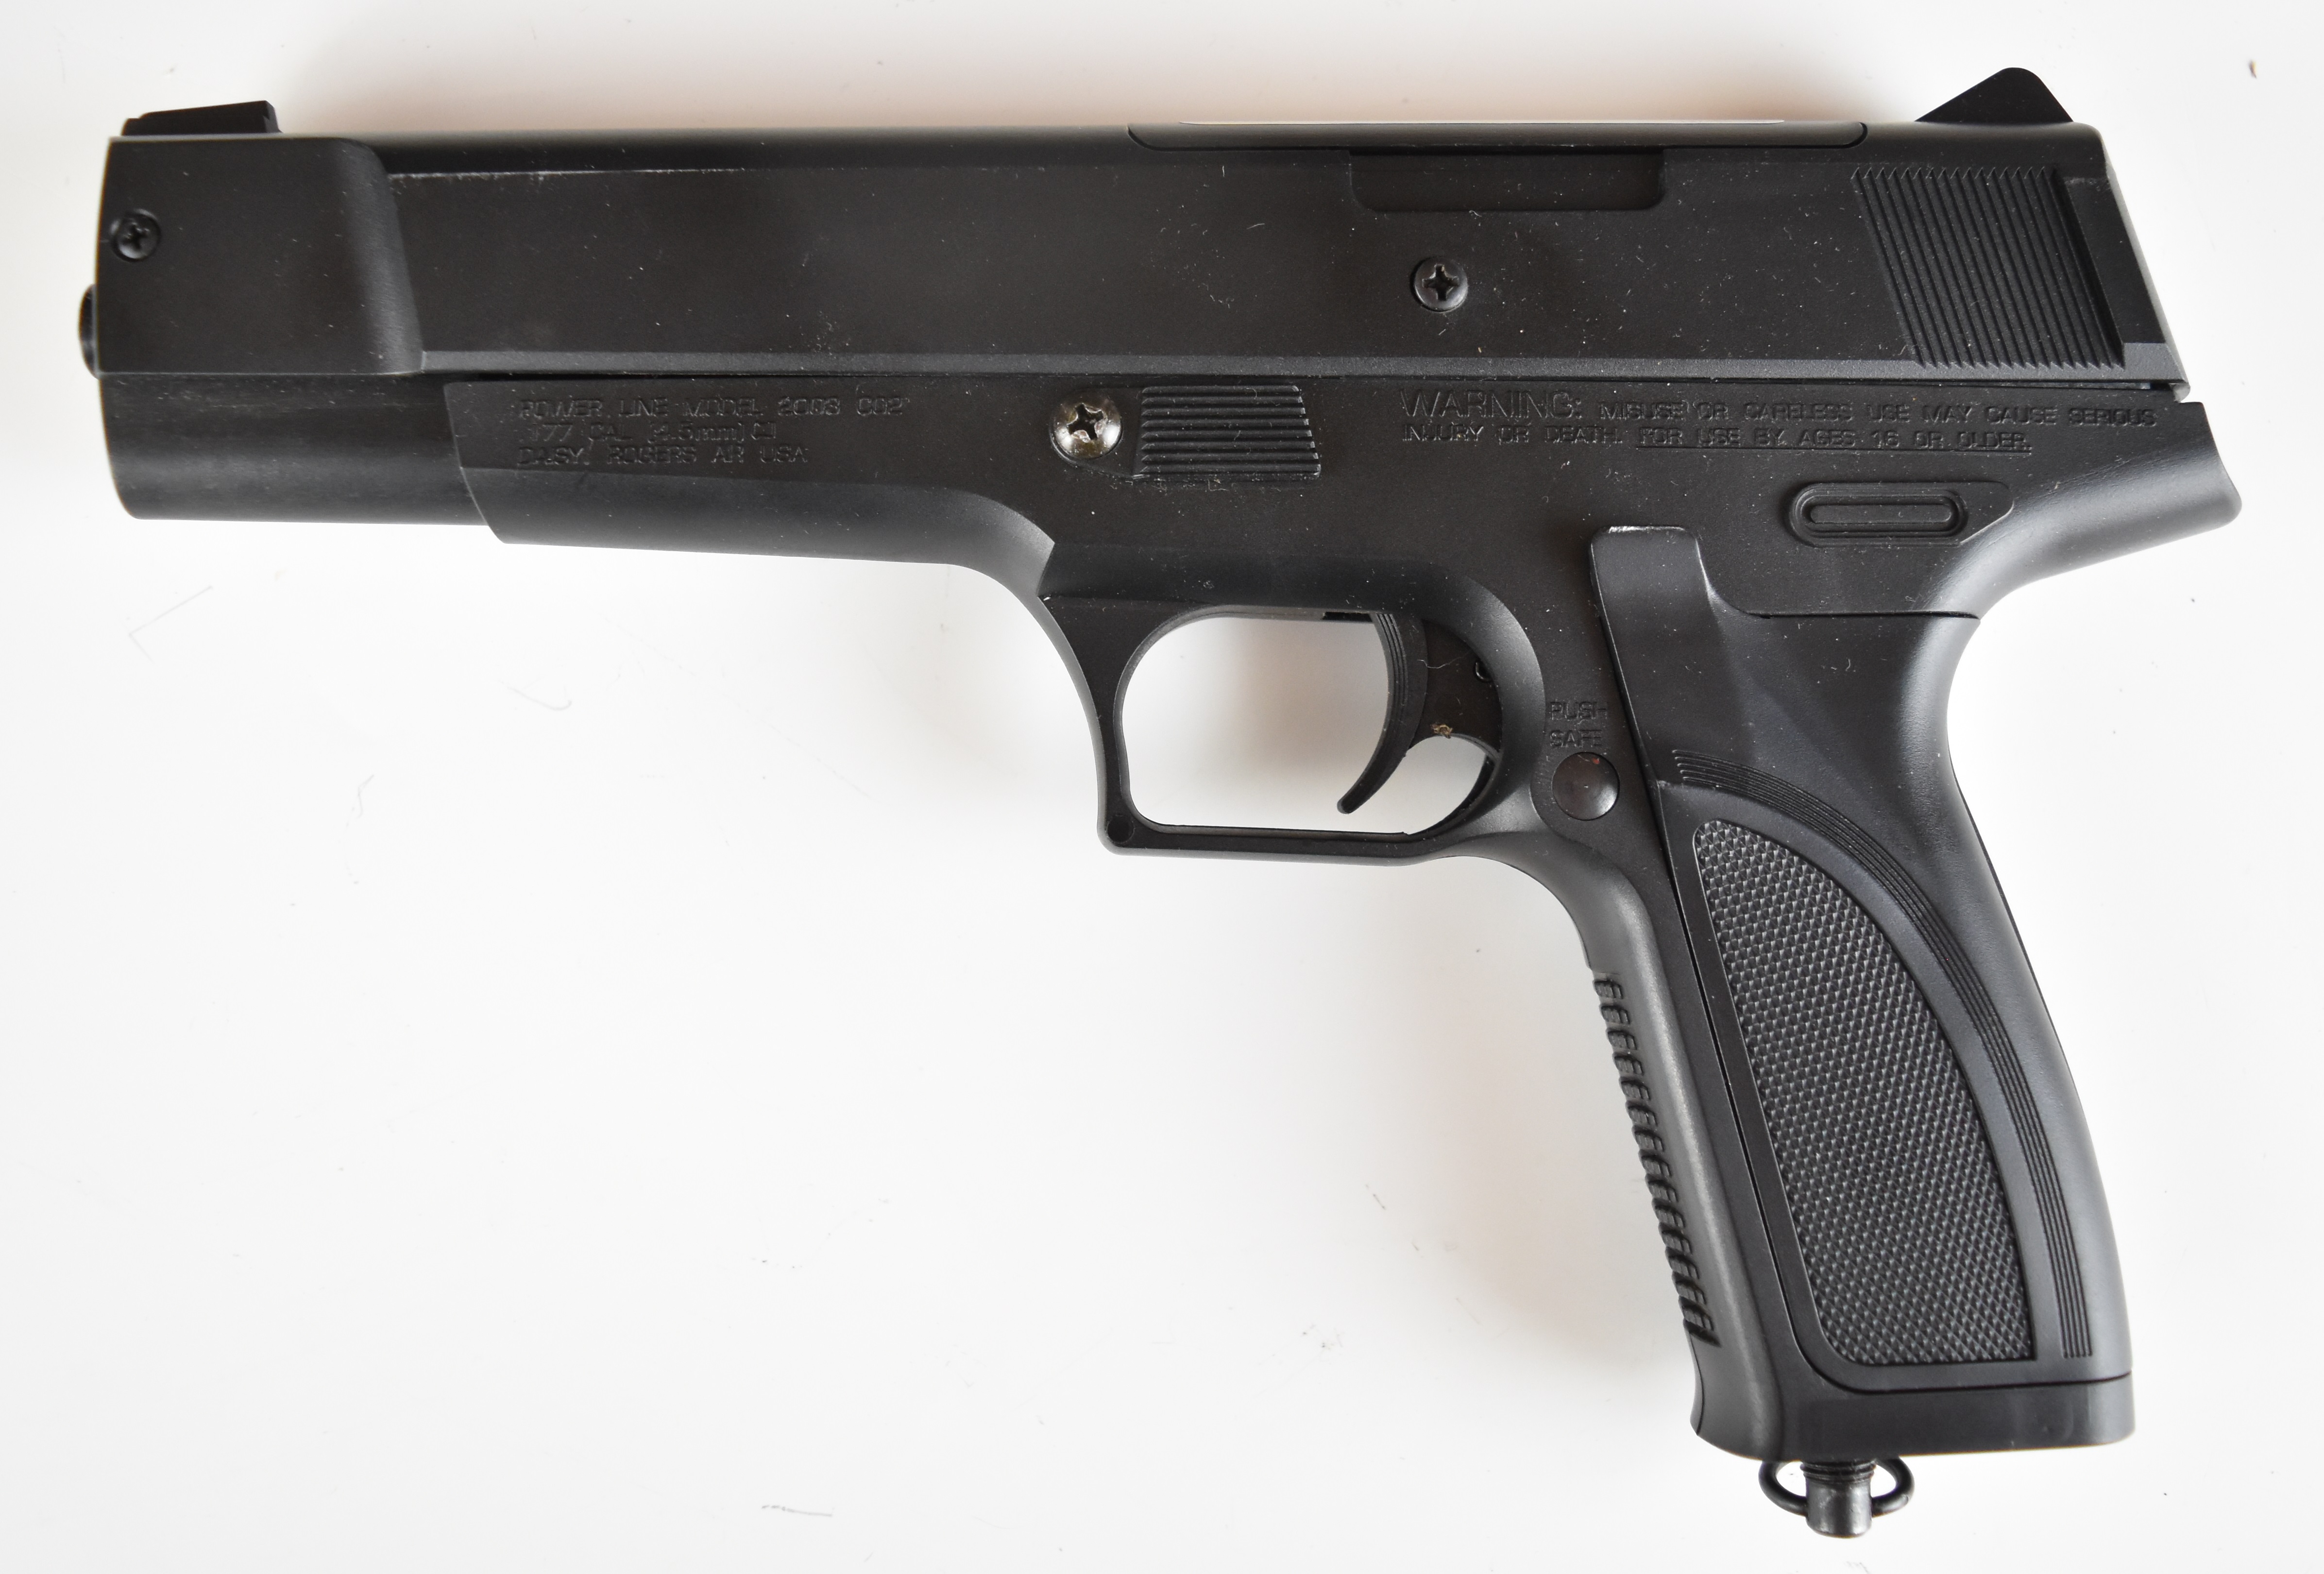 Two CO2 air pistols Daisy Model 2003 35-shot repeater .177 with chequered composite grips and - Image 8 of 14